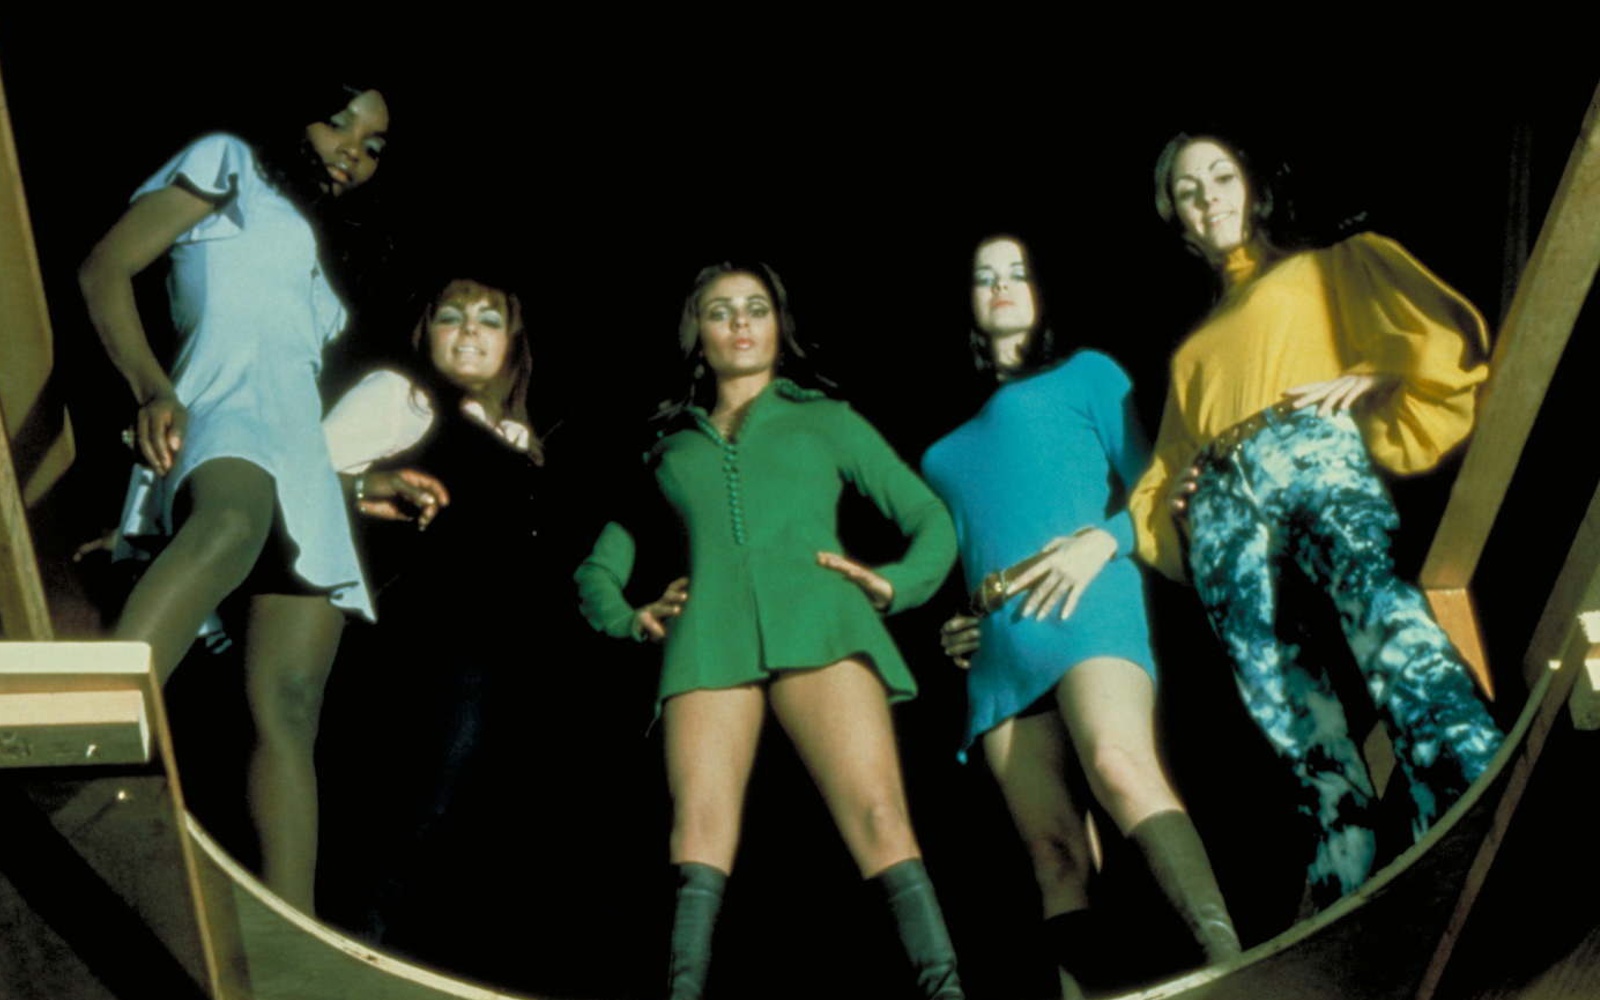 BEYOND THE VALLEY OF THE DOLLS